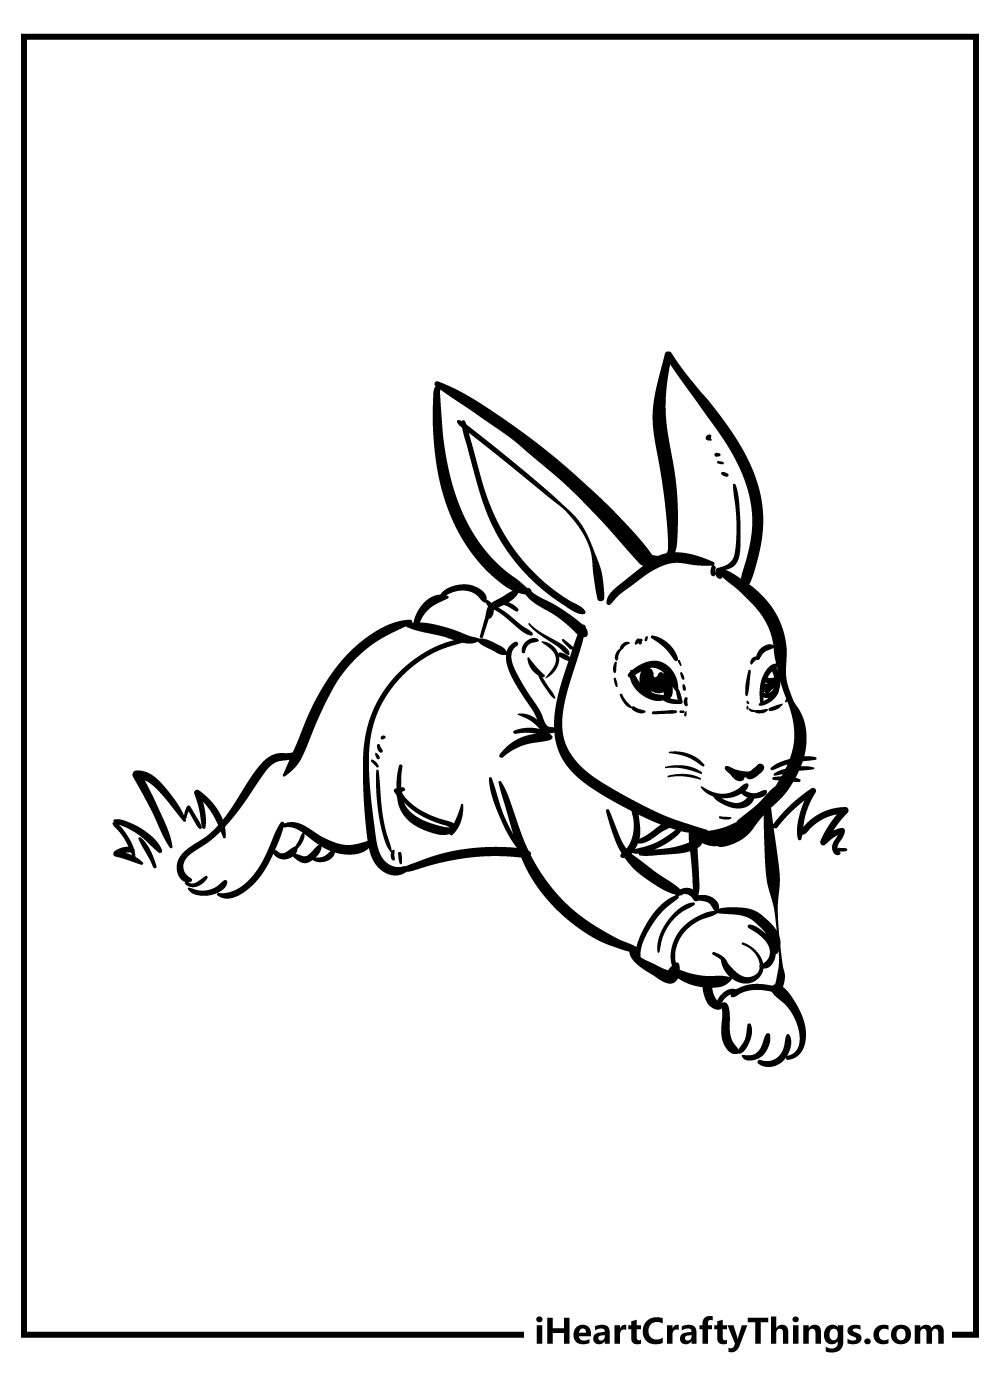 Peter rabbit coloring pages free printables